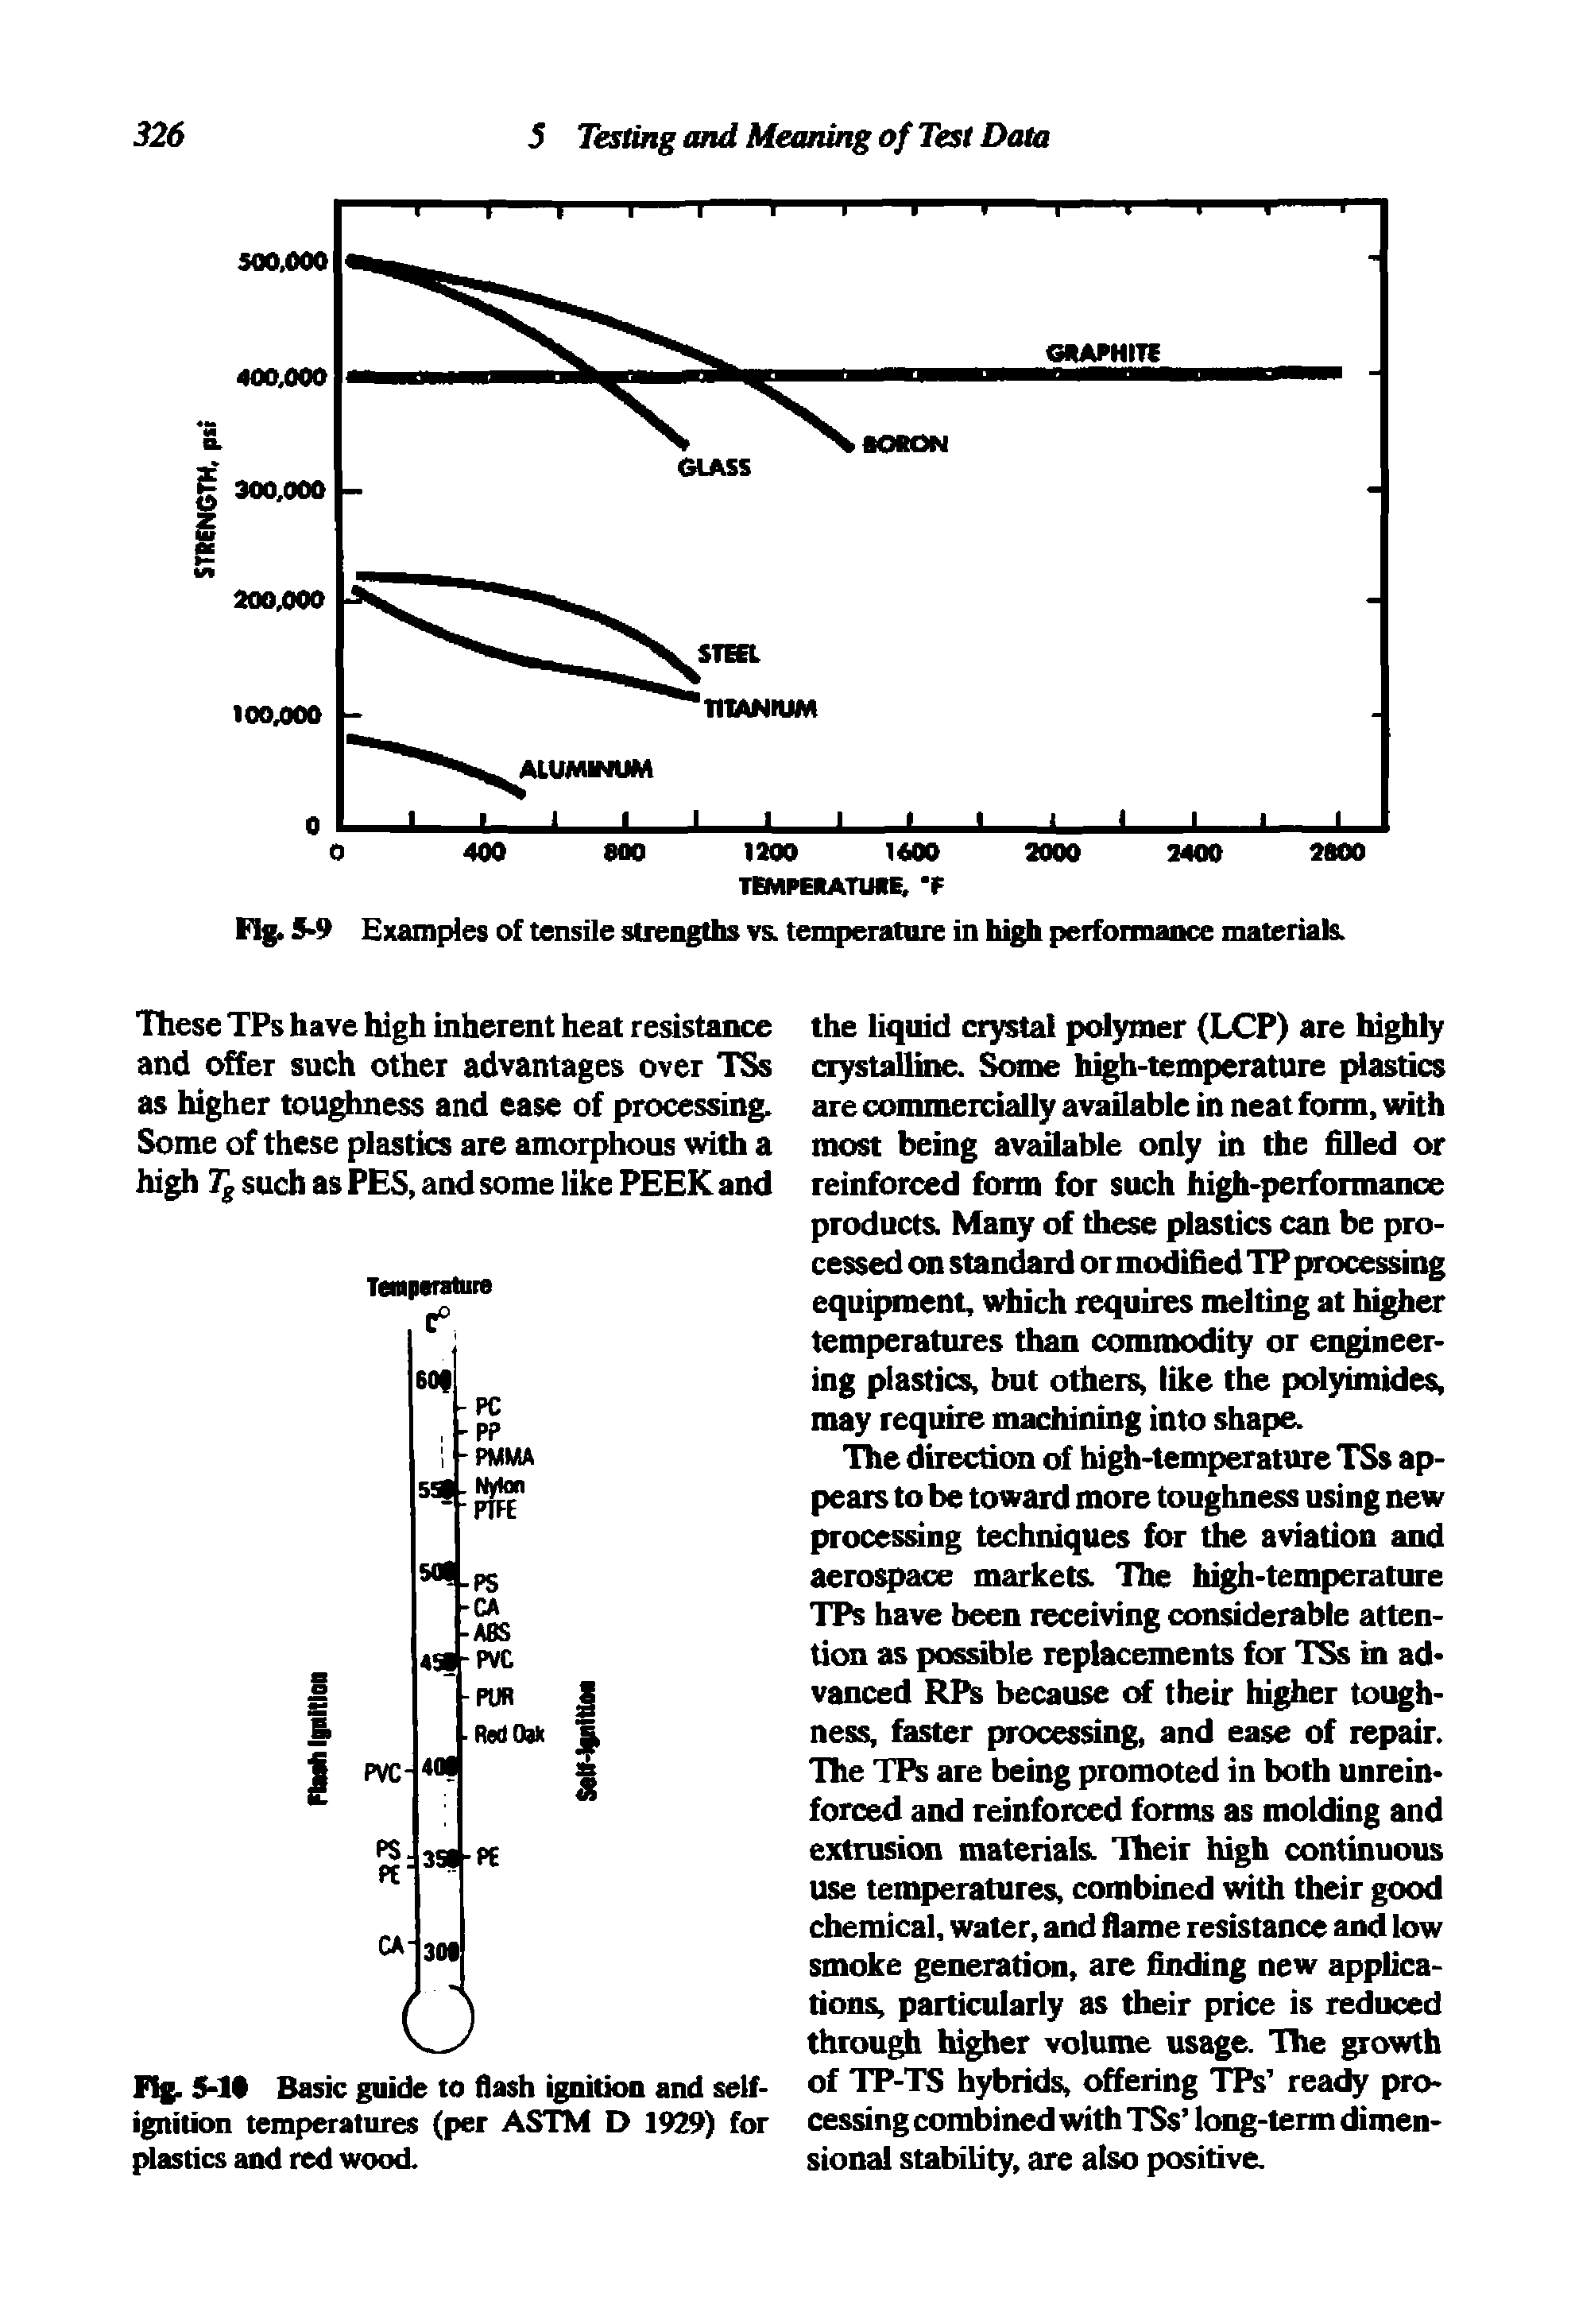 Fig. 5-1 Basic guide to flash ignition and selfignition temperatures (per A STM D 1929) for plastics and red wood.